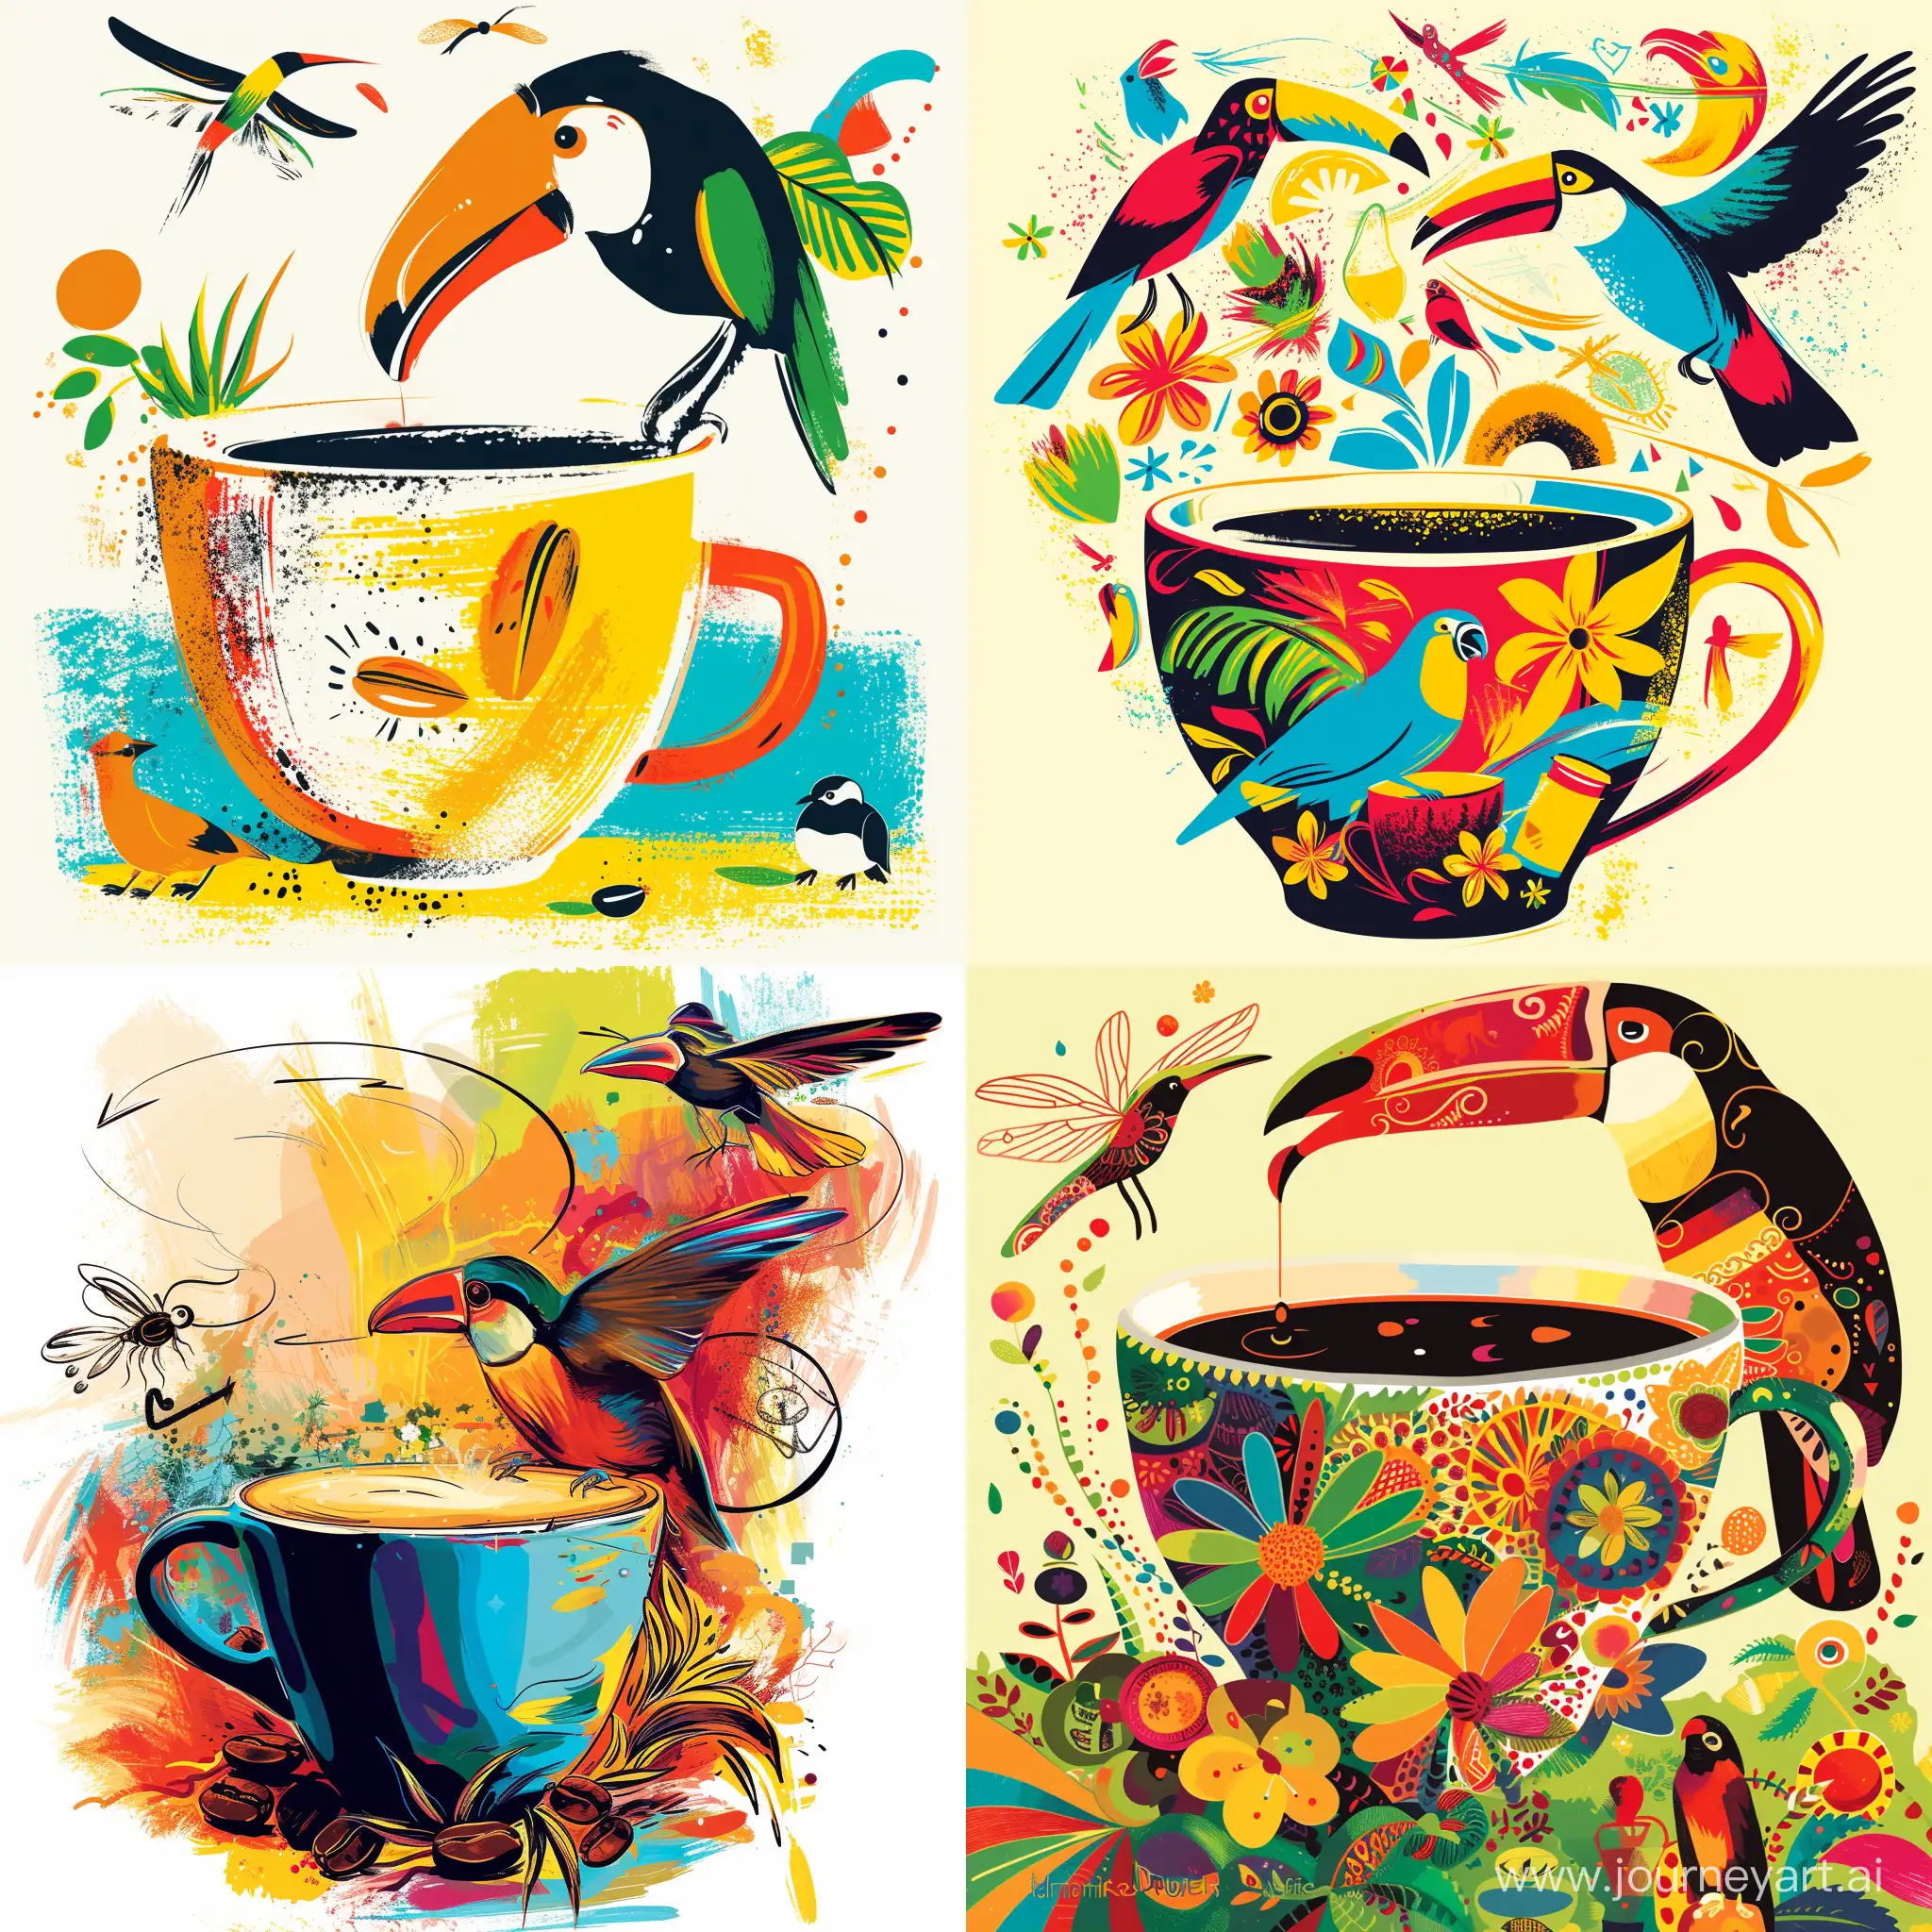 Vibrant-Brazilian-Wildlife-Surrounds-Coffee-Cup-in-Abstract-Illustration